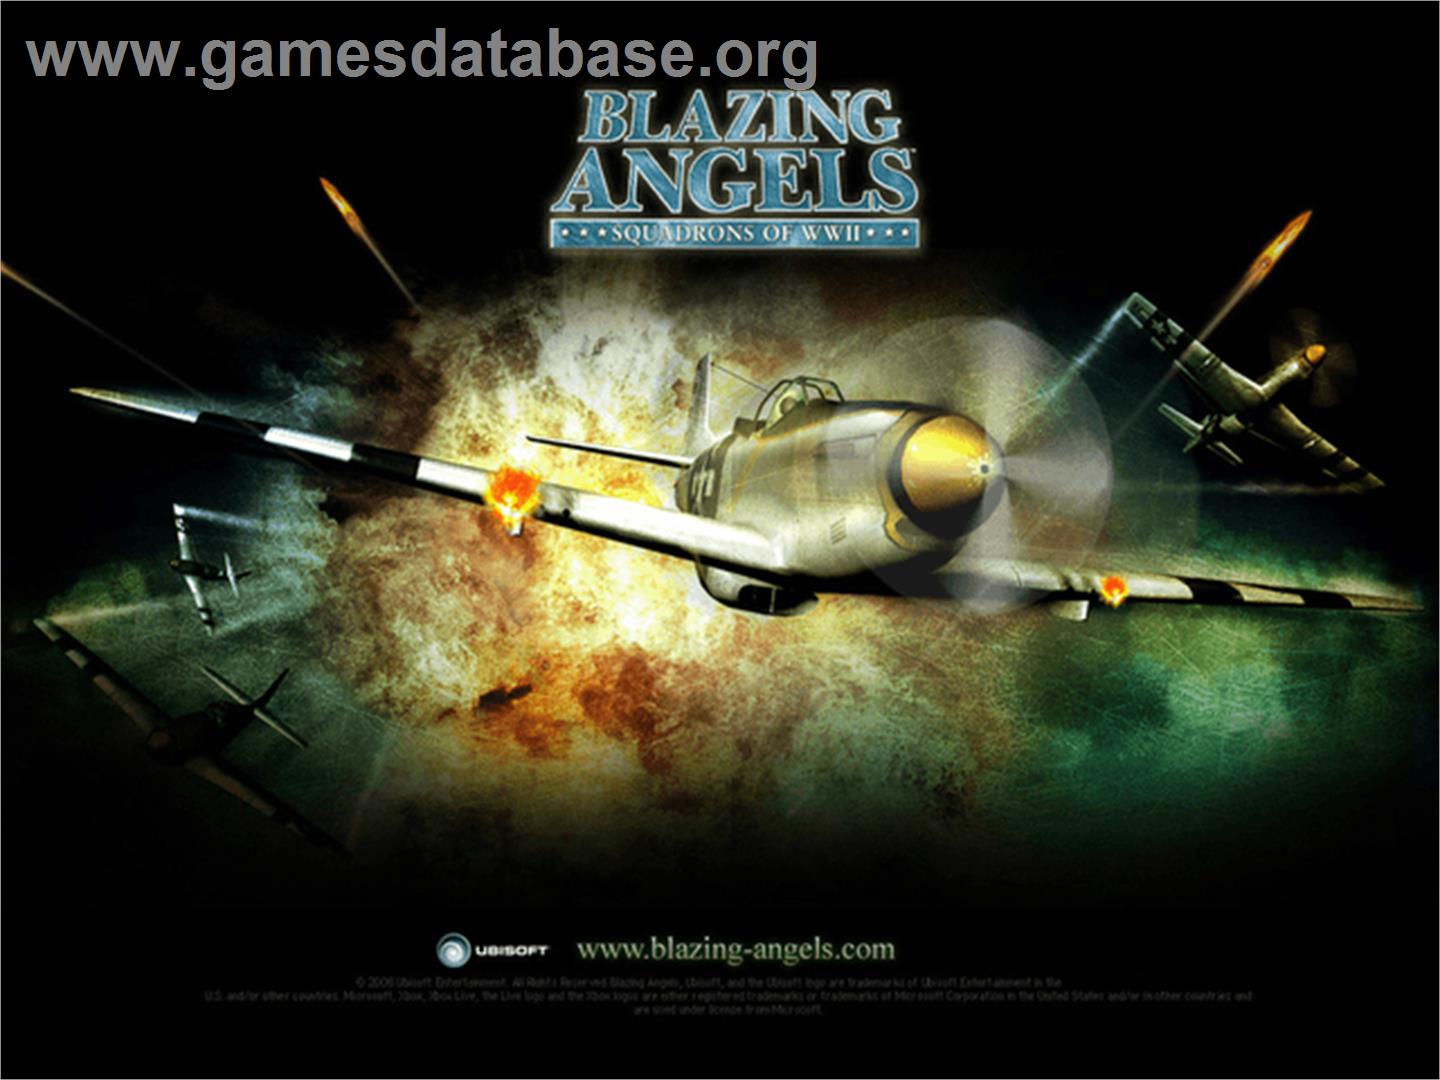 Blazing Angels: Squadrons of WWII - Microsoft Xbox - Artwork - Title Screen